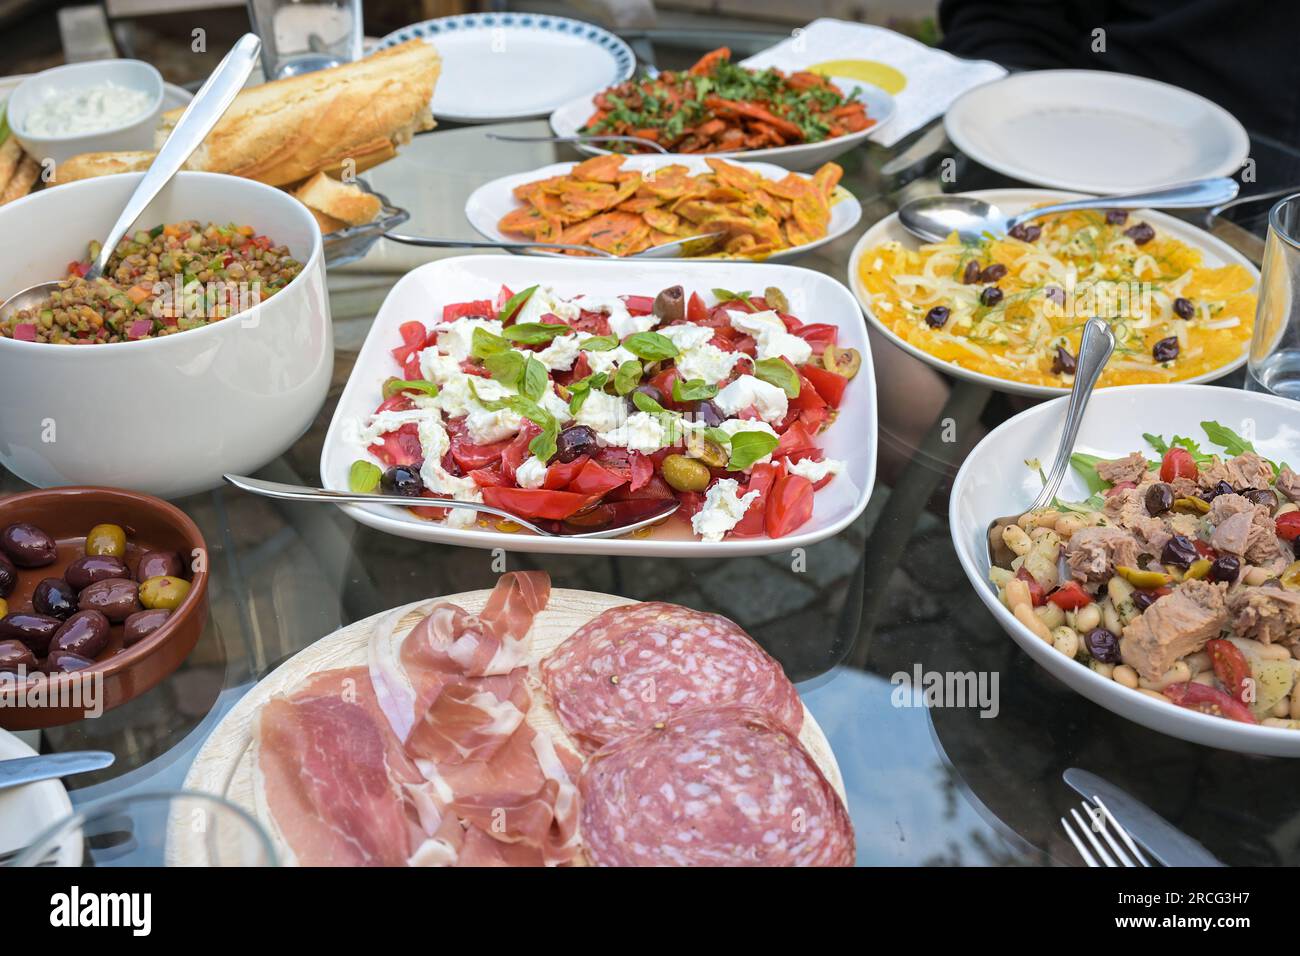 Summer dinner table with various salads, snacks and bread for a party meal with friends or family, selected focus, narrow depth of field Stock Photo